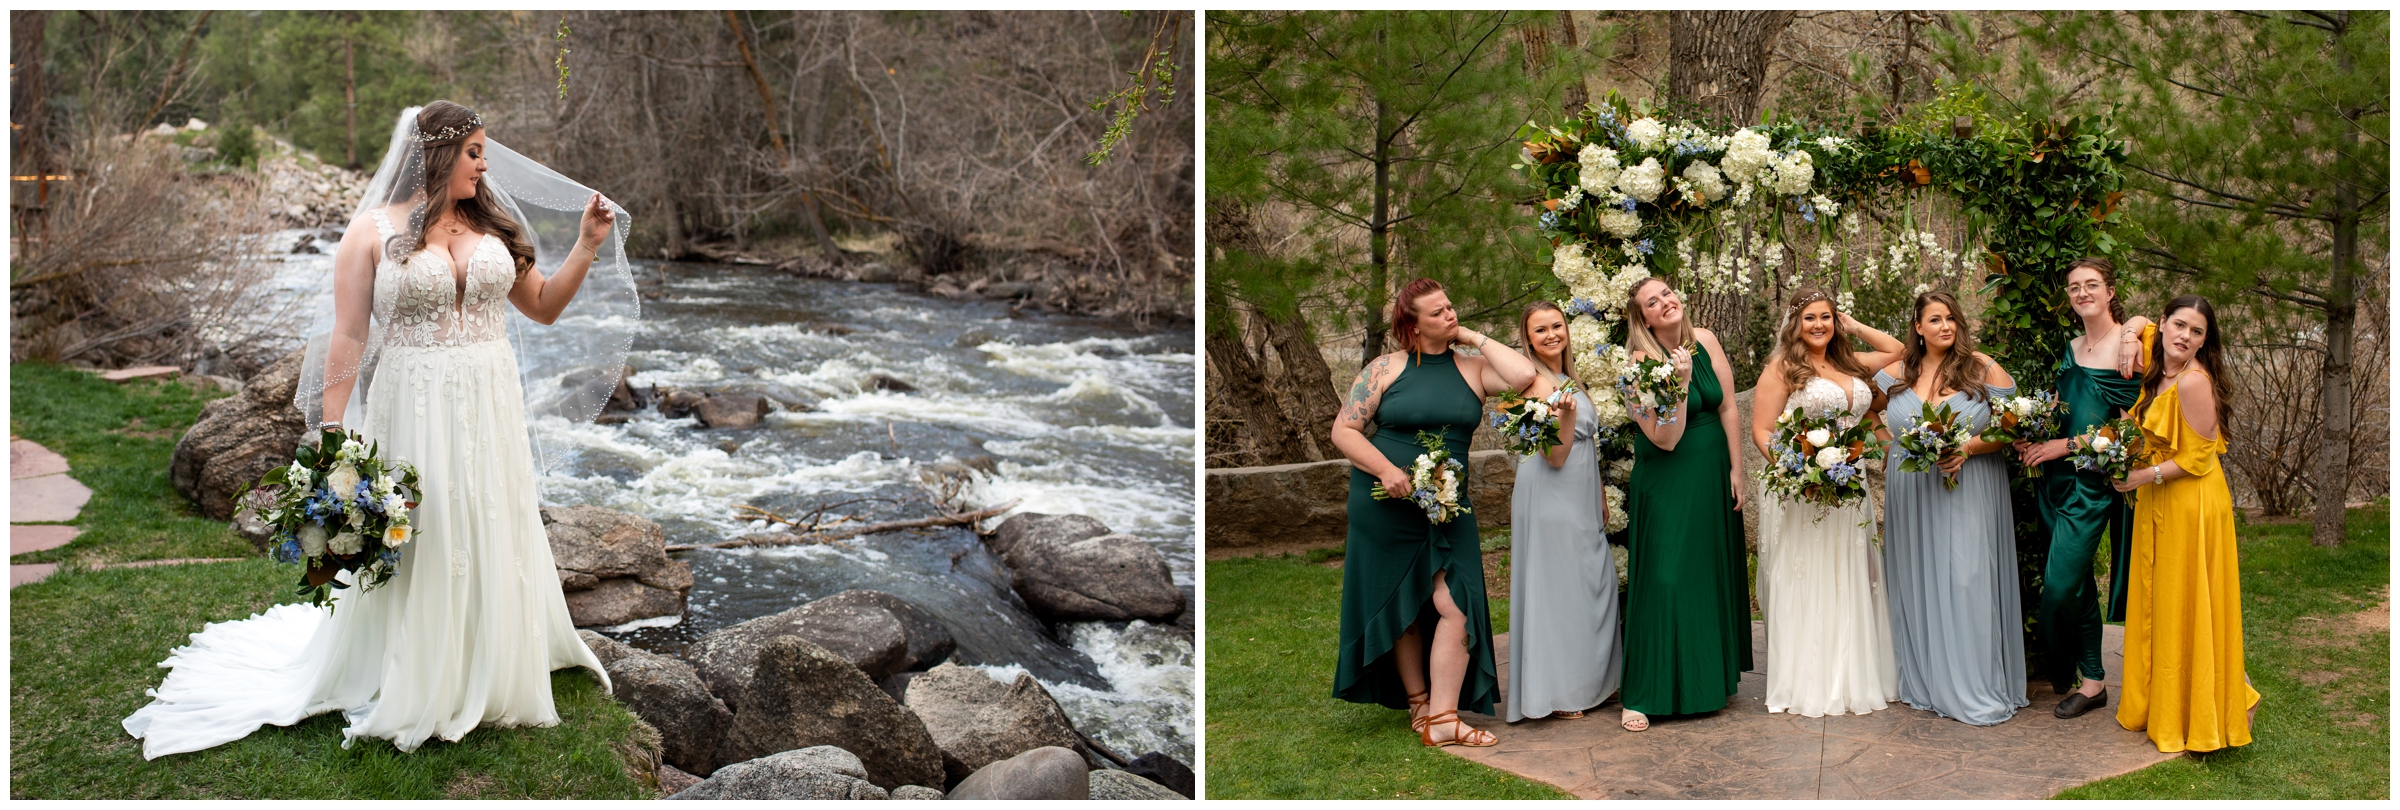 bride holding veil and posing next to the river during Boulder wedding pictures 